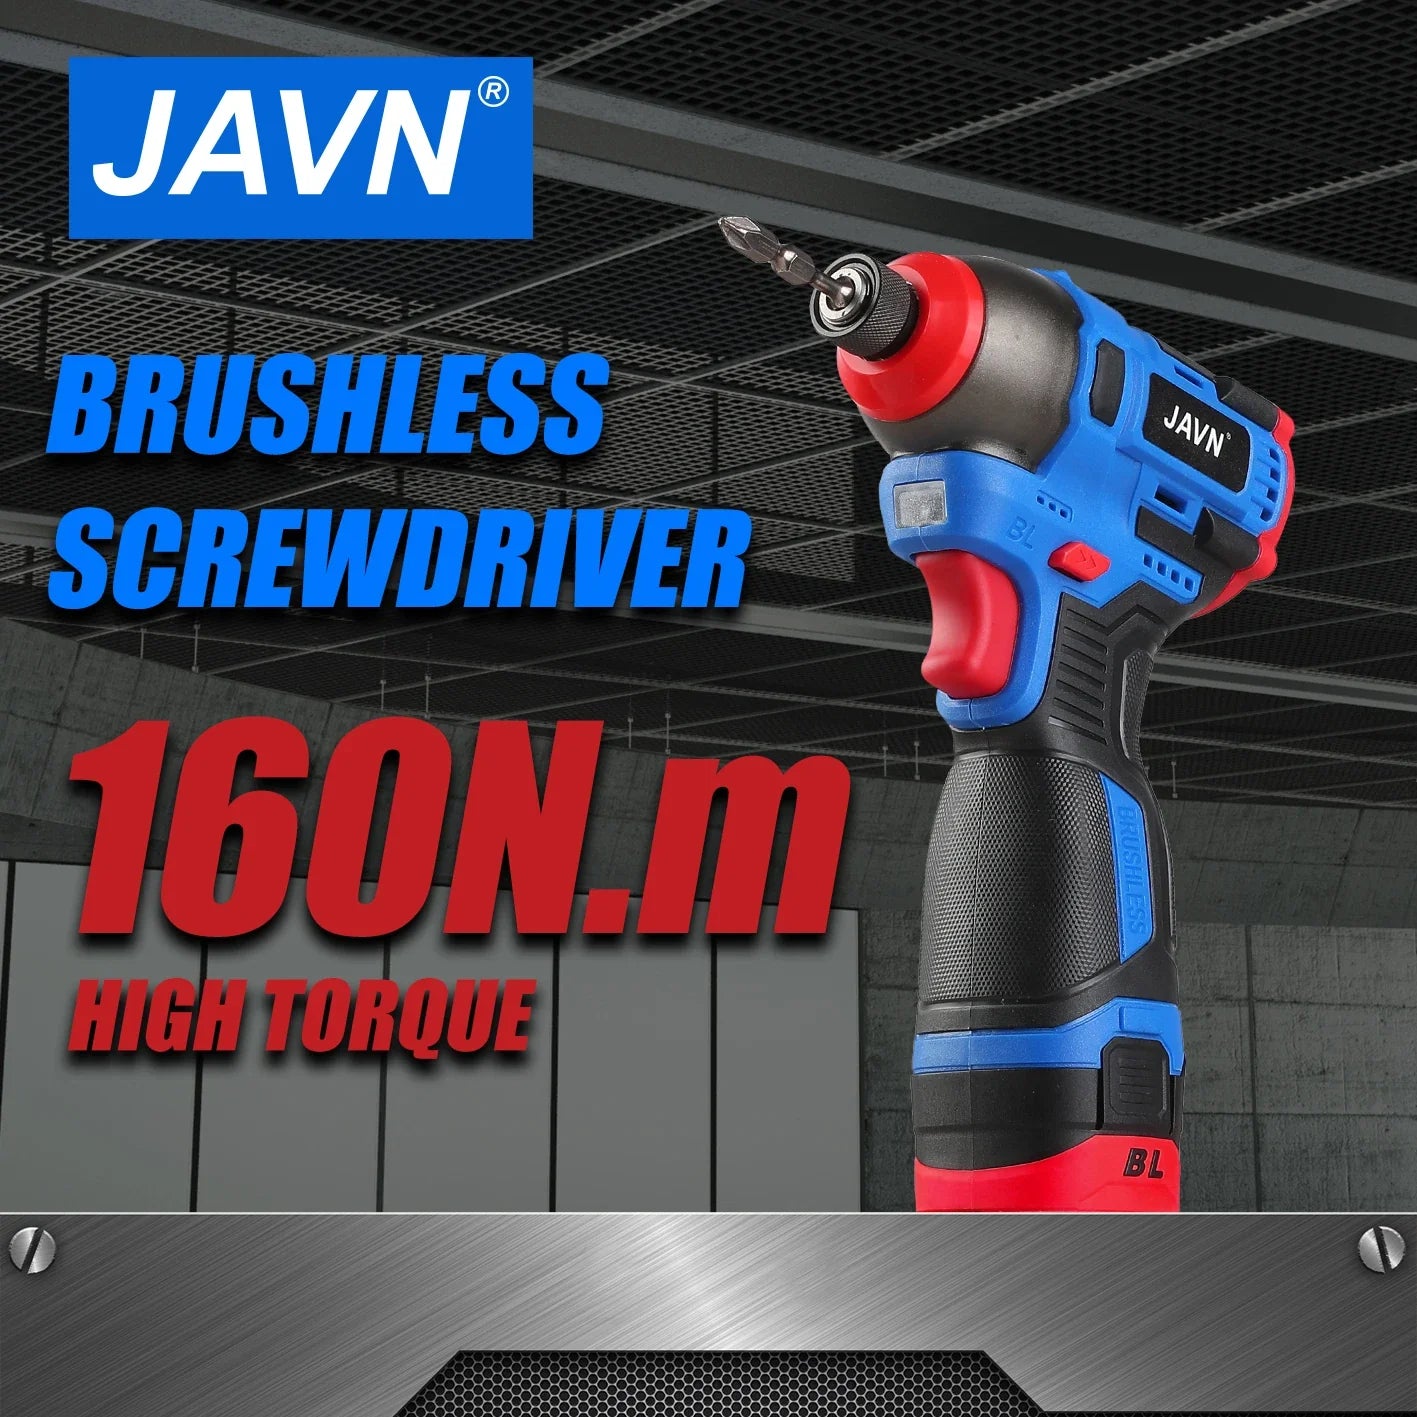 JAVN 16V Electric Drill Screwdriver 160N.m impact Driver cordless drill Household Multifunction Hit Power Tools  ourlum.com   